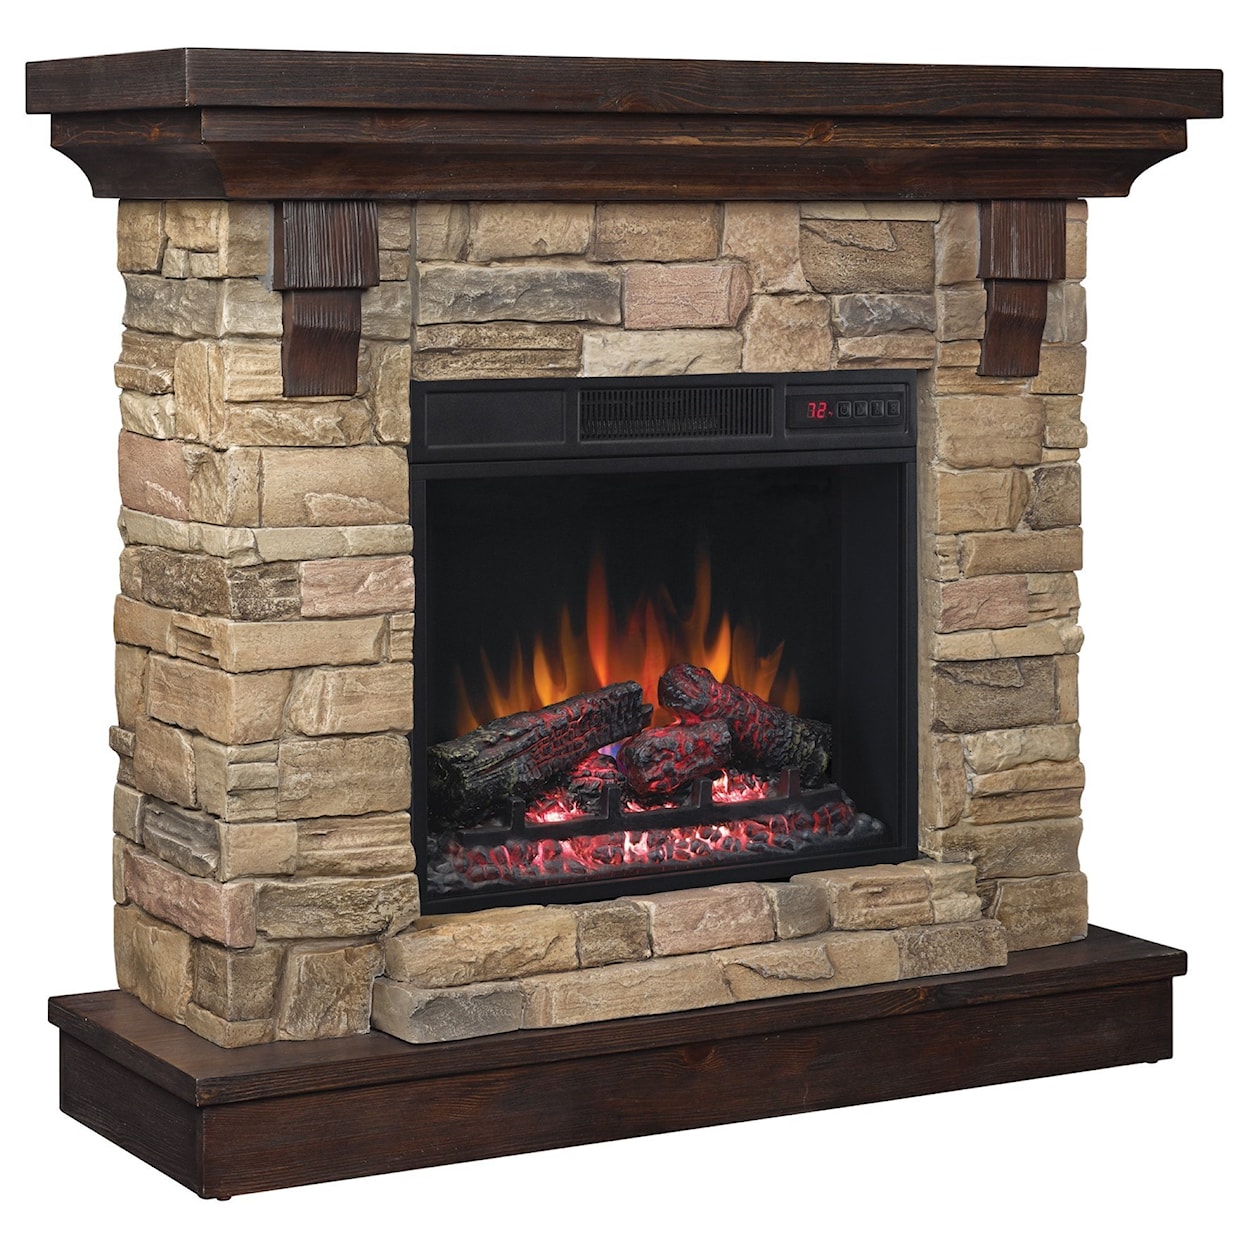 ClassicFlame Eugene 23" Wall Mantel Fireplace